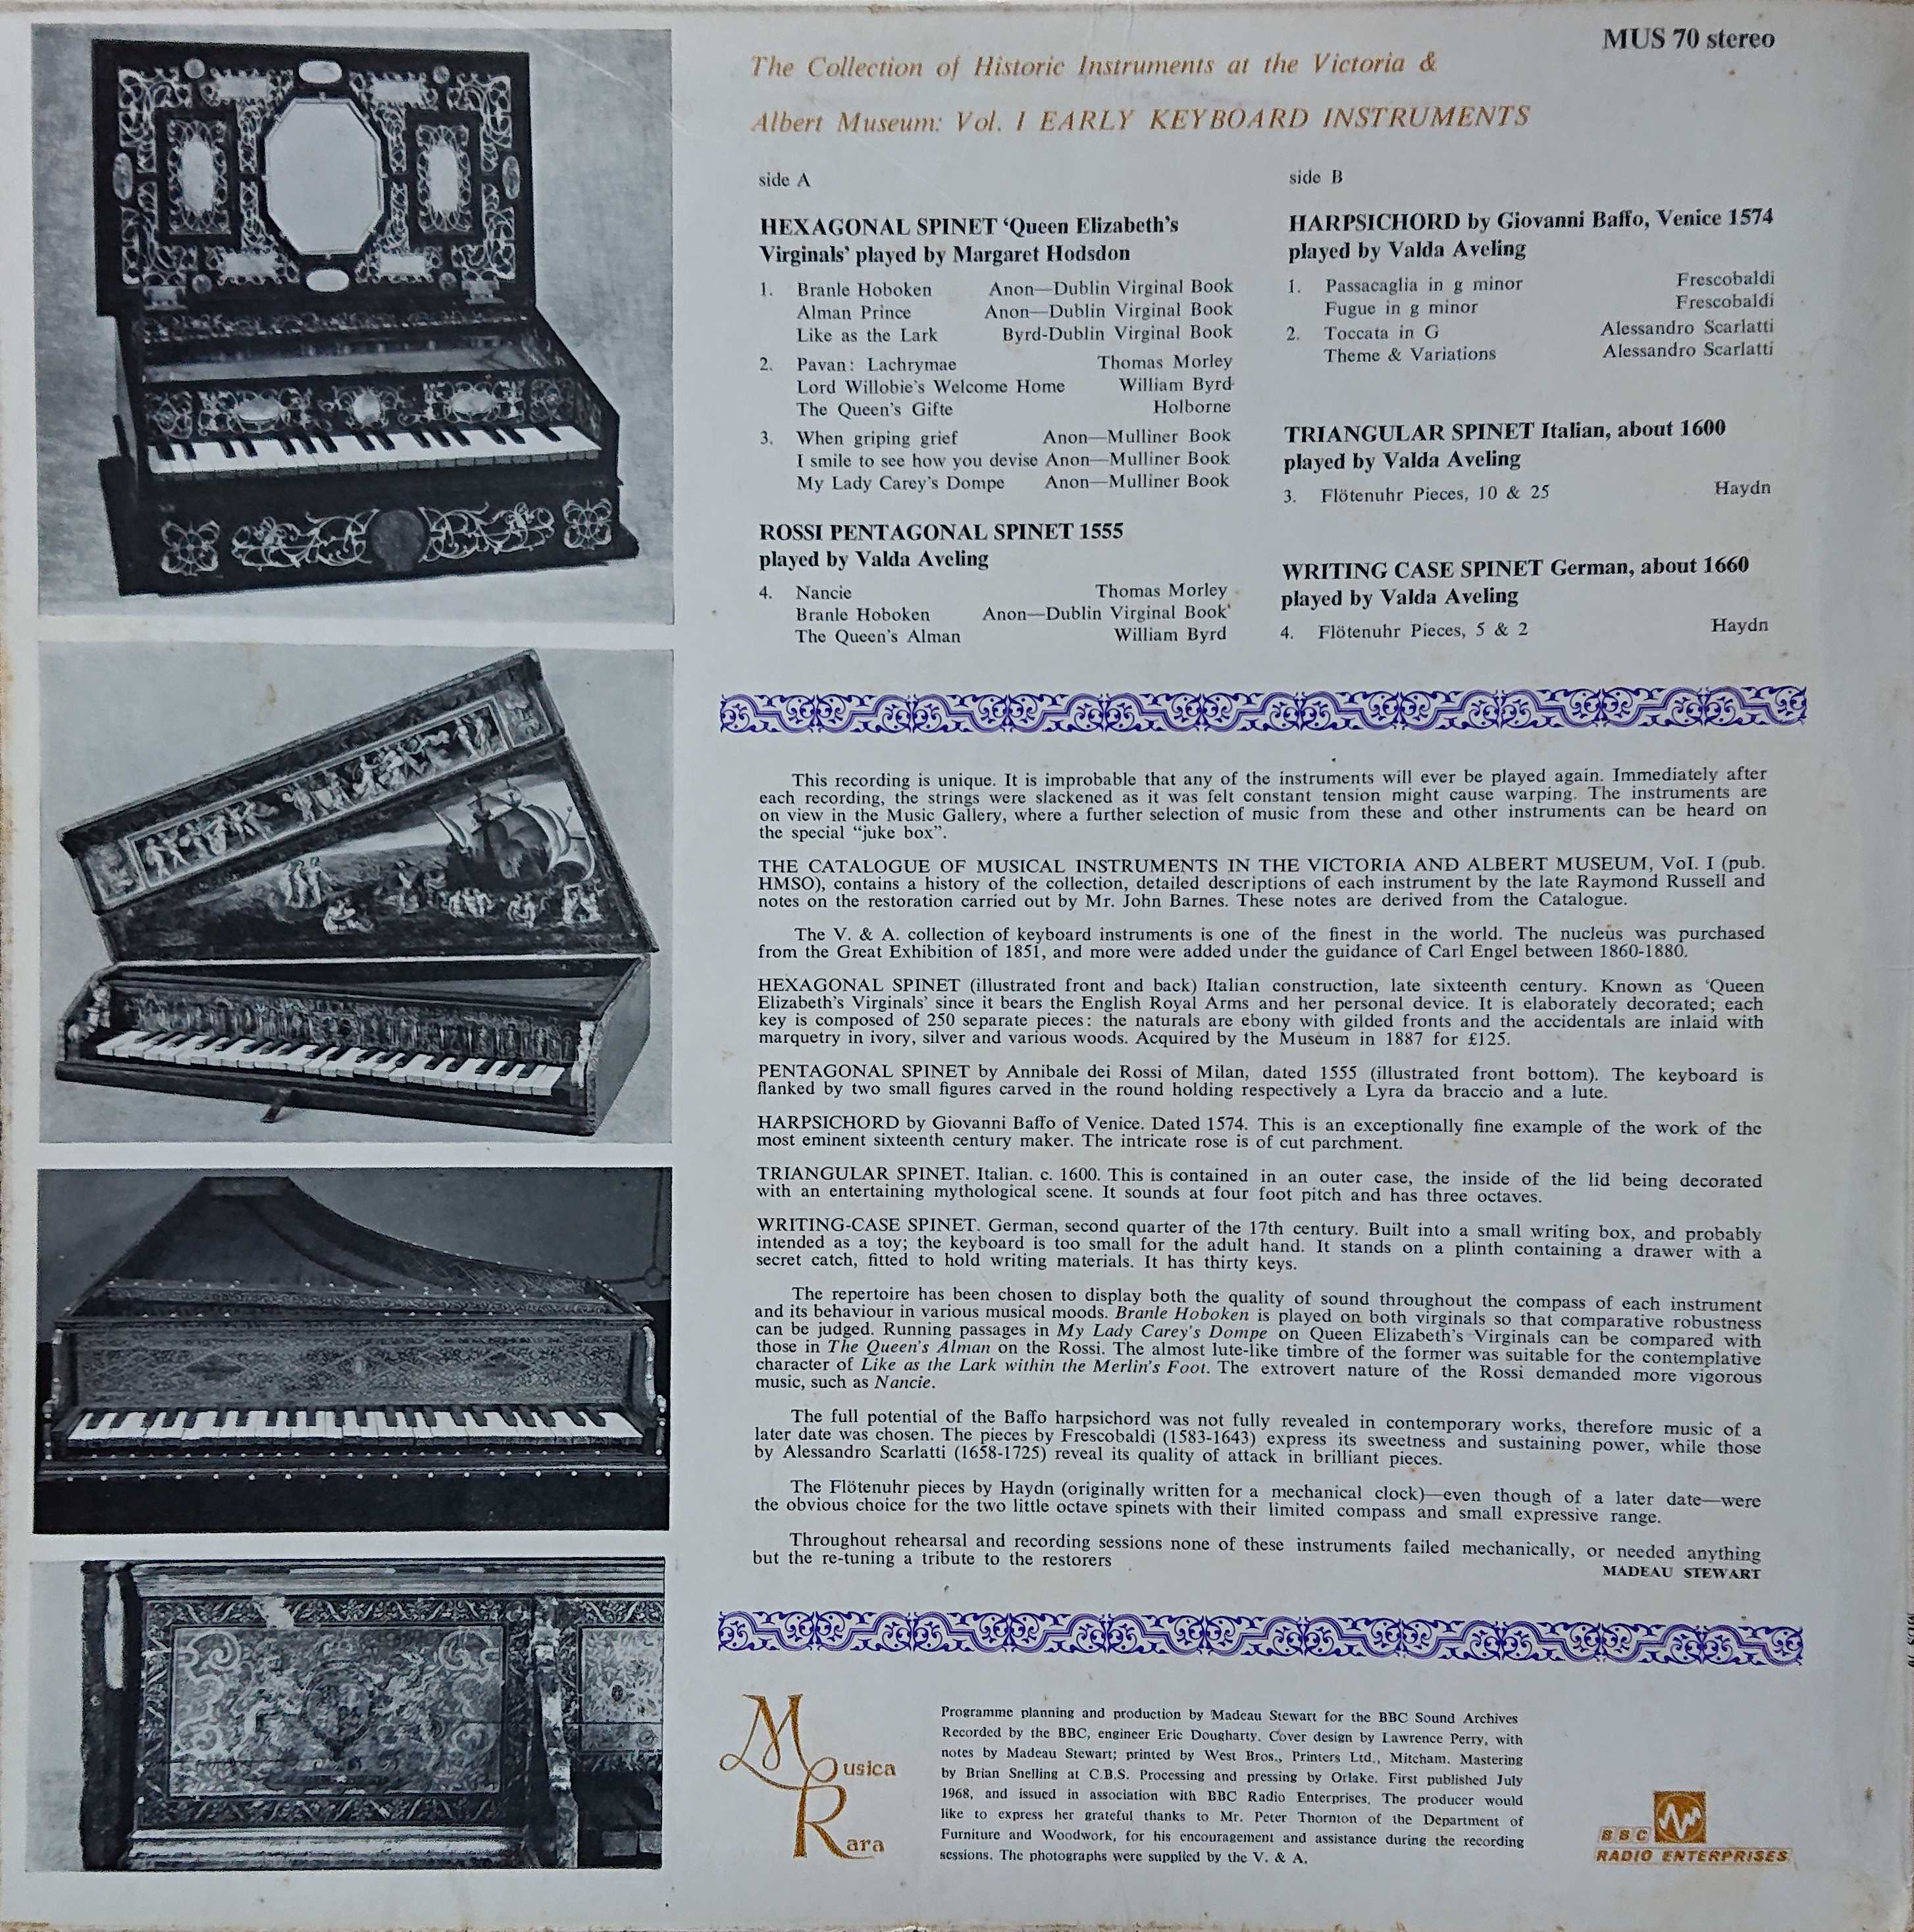 Picture of MUS 70 The V & A keyboard collection - Volume I by artist Various from the BBC records and Tapes library